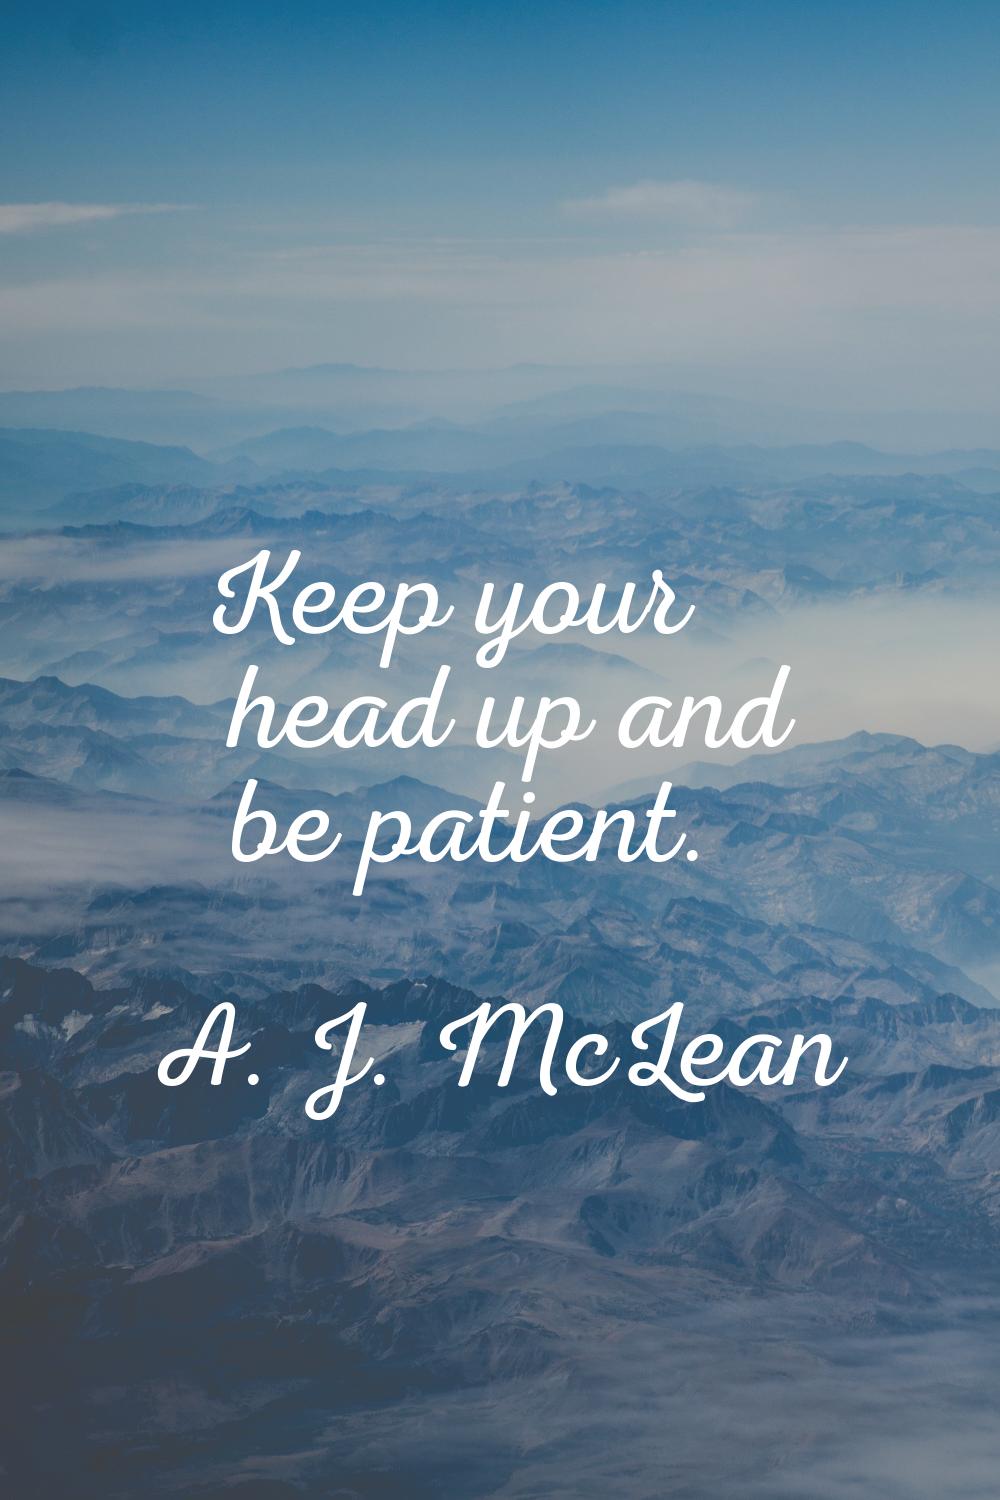 Keep your head up and be patient.